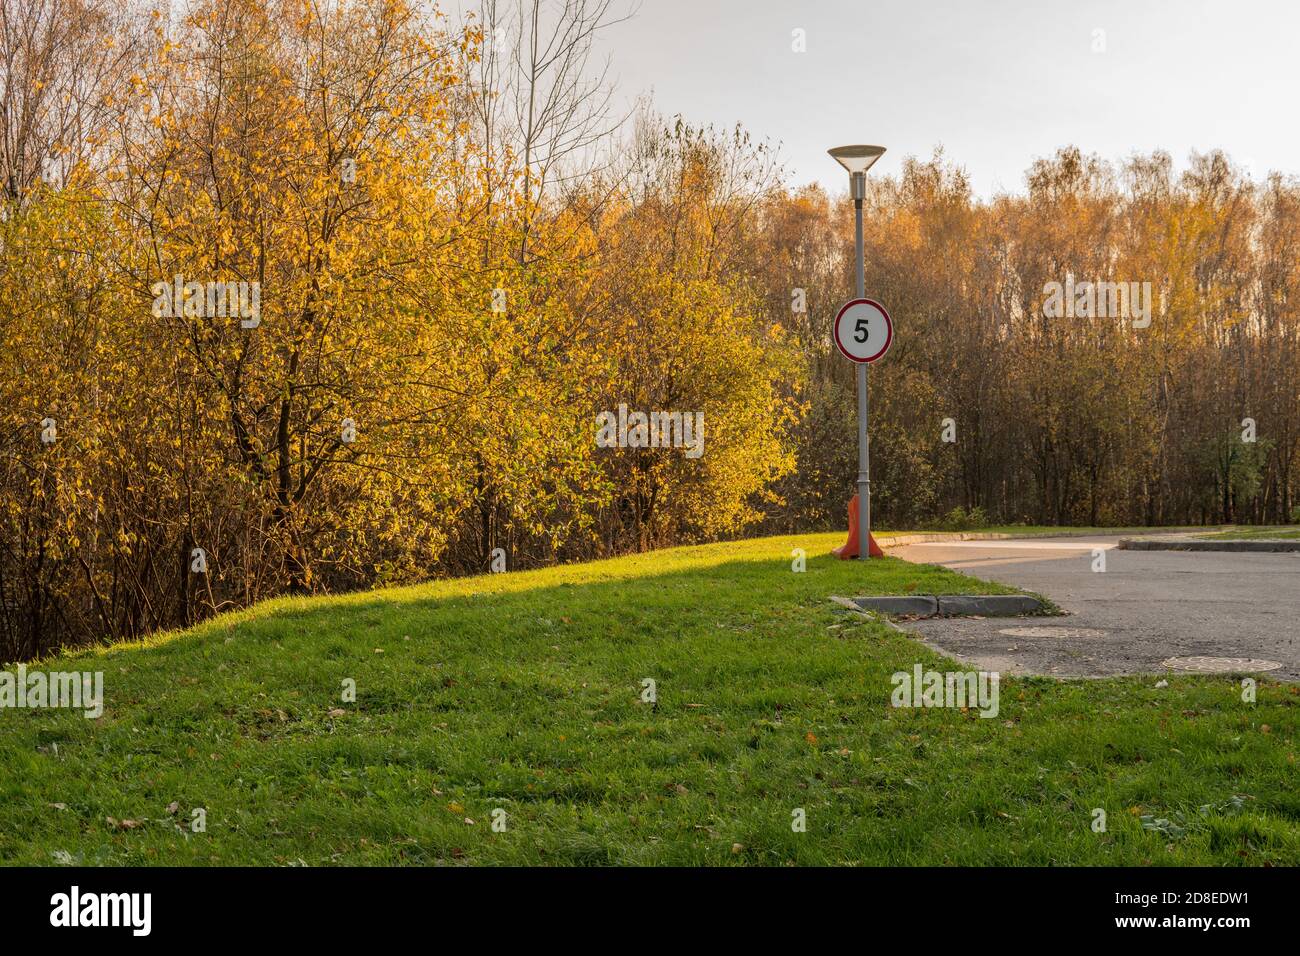 Road sign on the background of a yellow forest five in a red circle, autumn meadow, green grass bright sunlight asphalt road in the shade Stock Photo